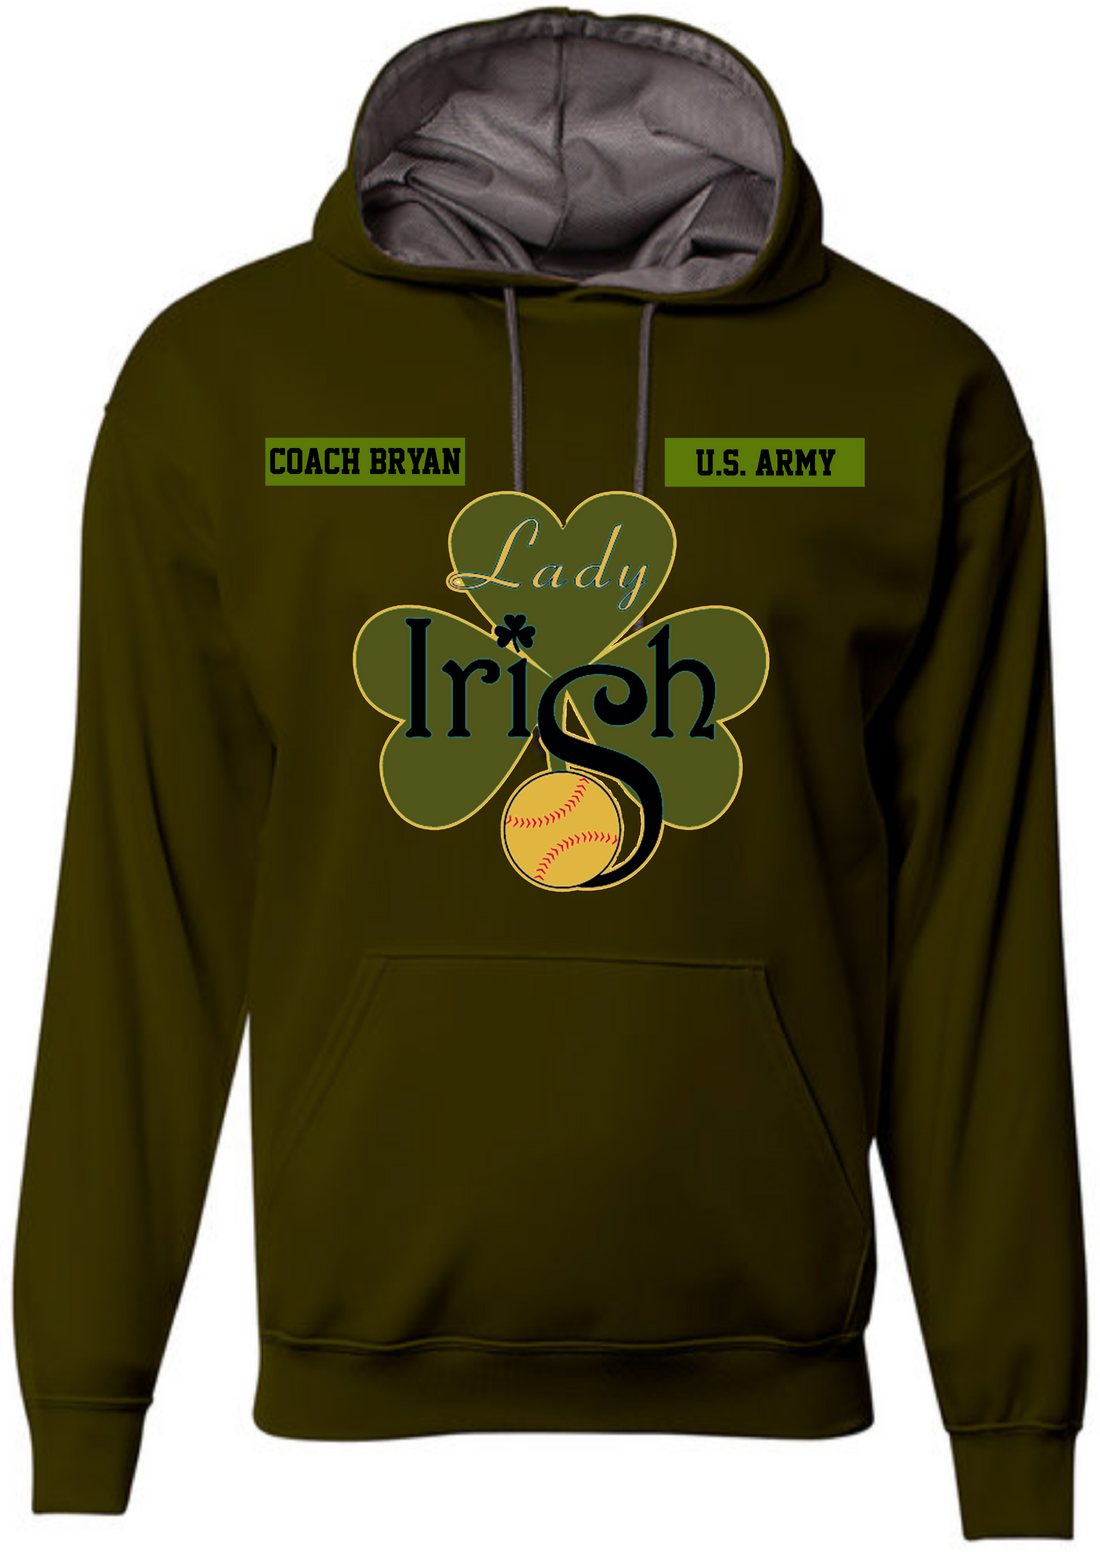 Military Appreciation - Military Green Hoodie